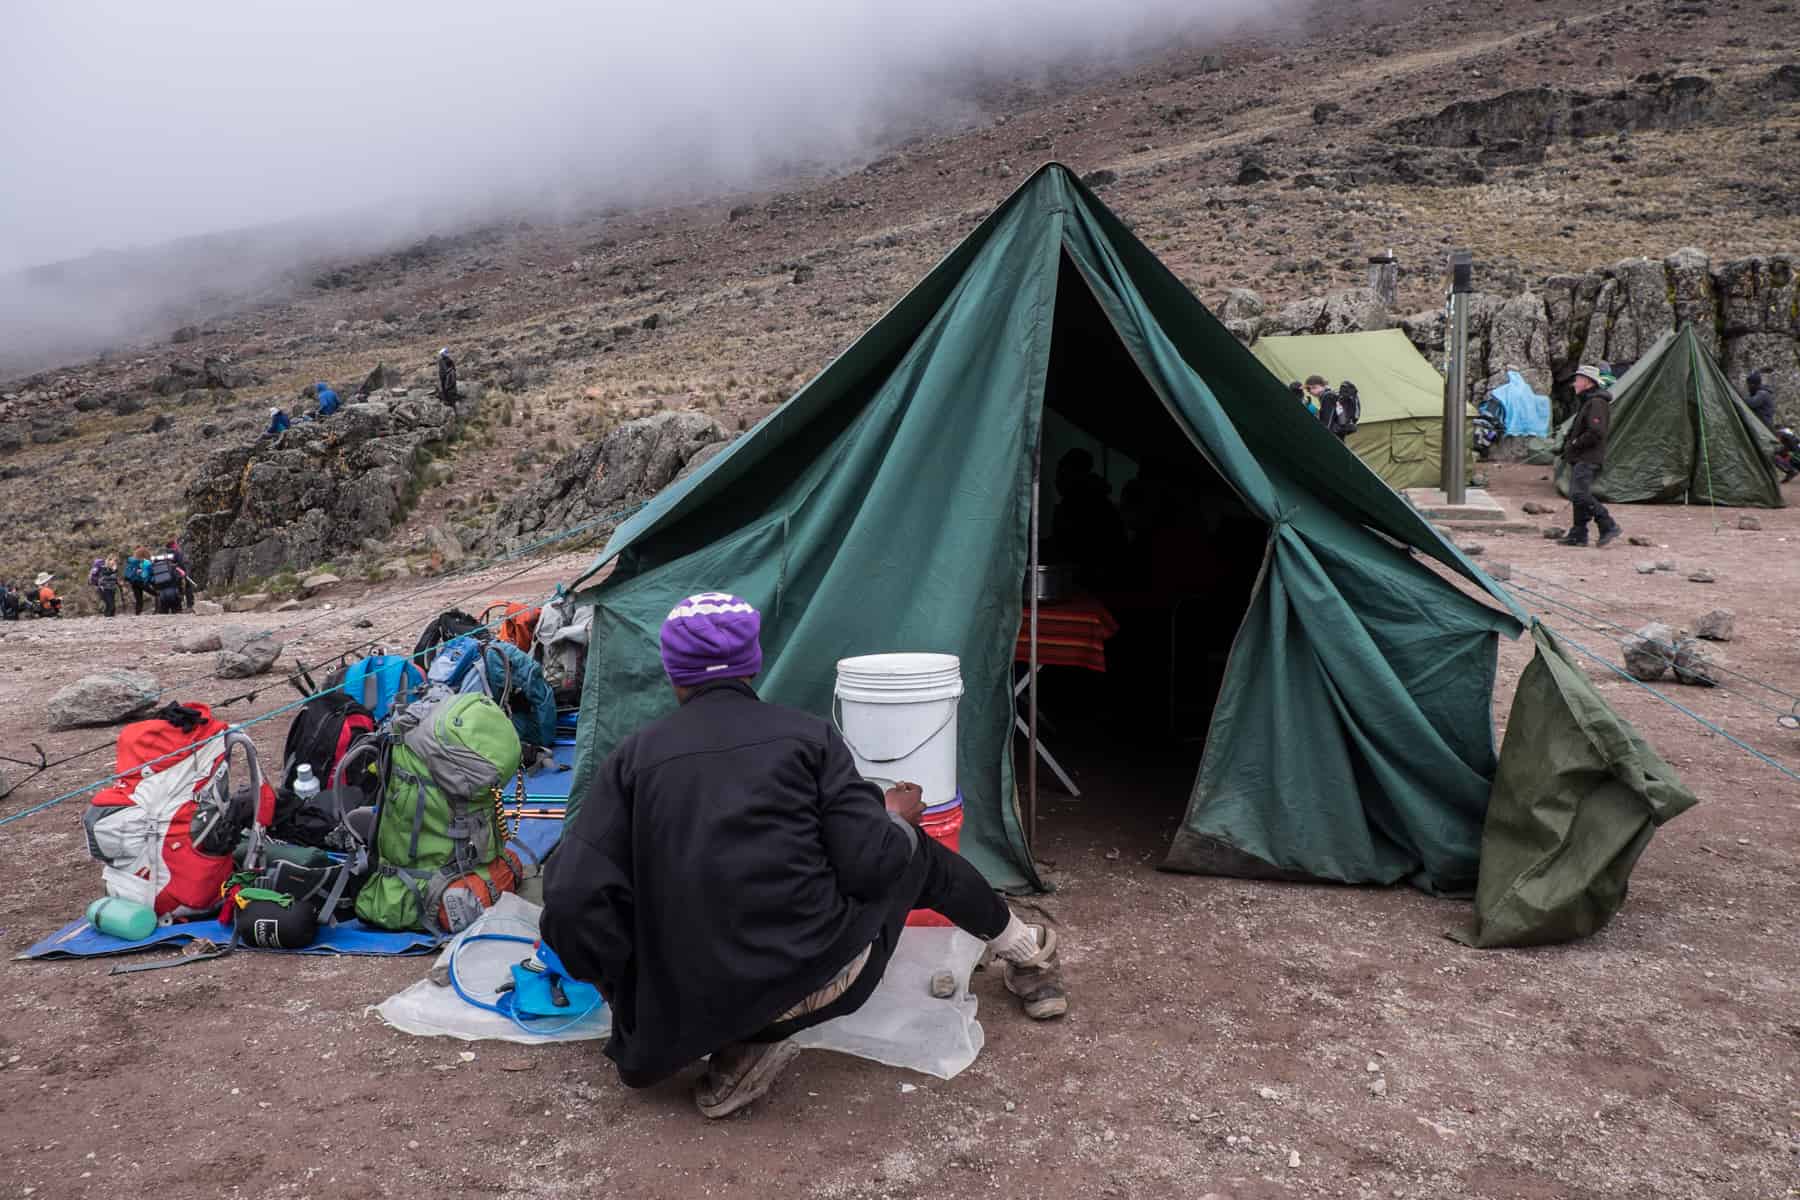 A porter on the Kilimanjaro trek sitting outside a green tent and filling water bottled from a white water barrel